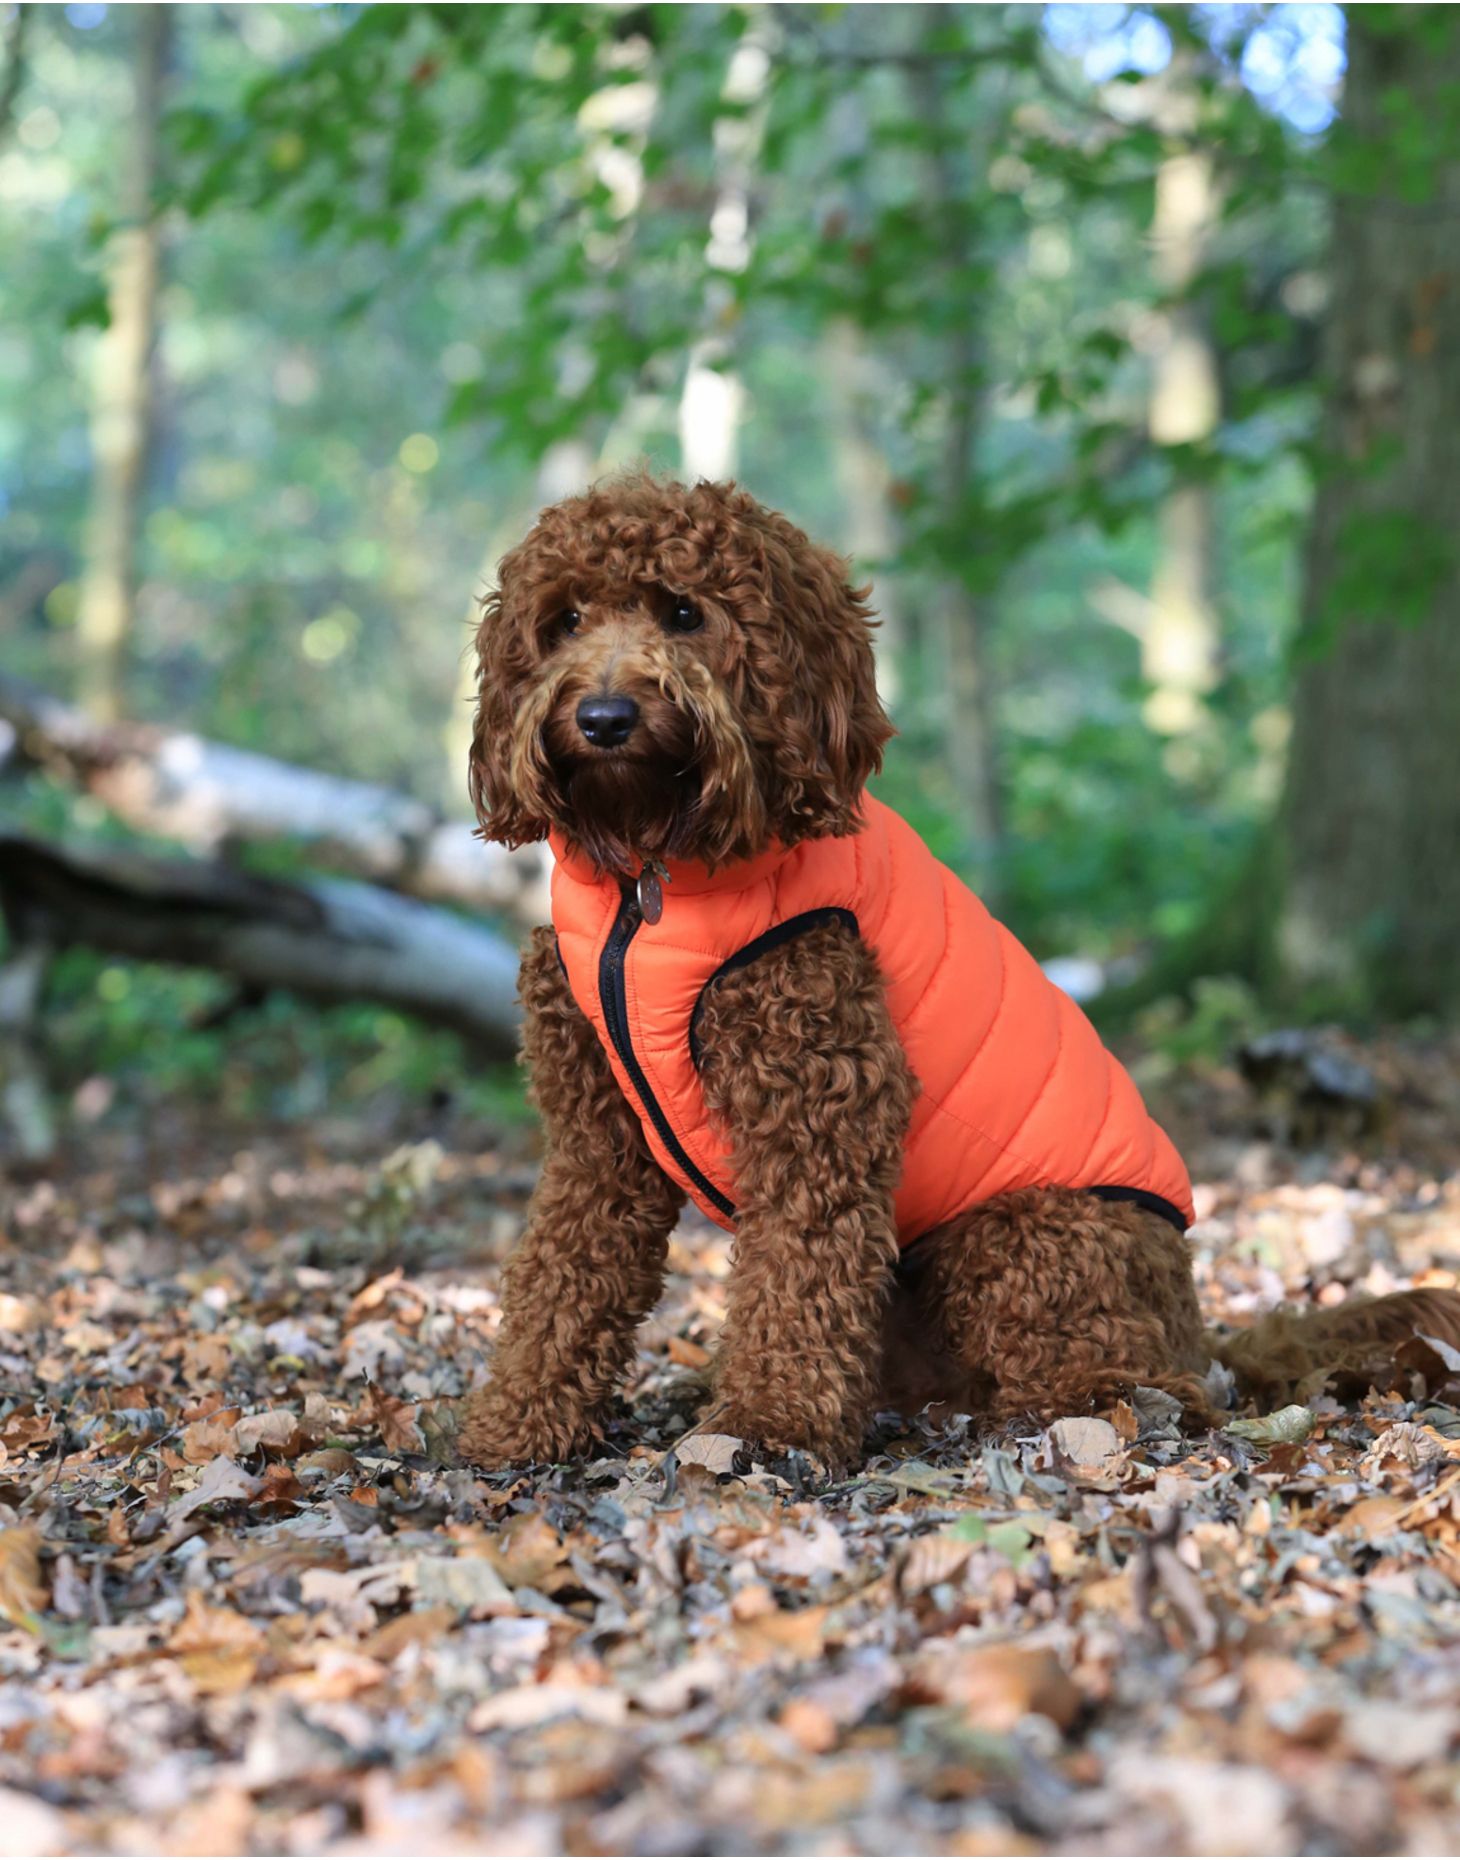 Dog coats, accessories & clothing on the Friends of Joules shop